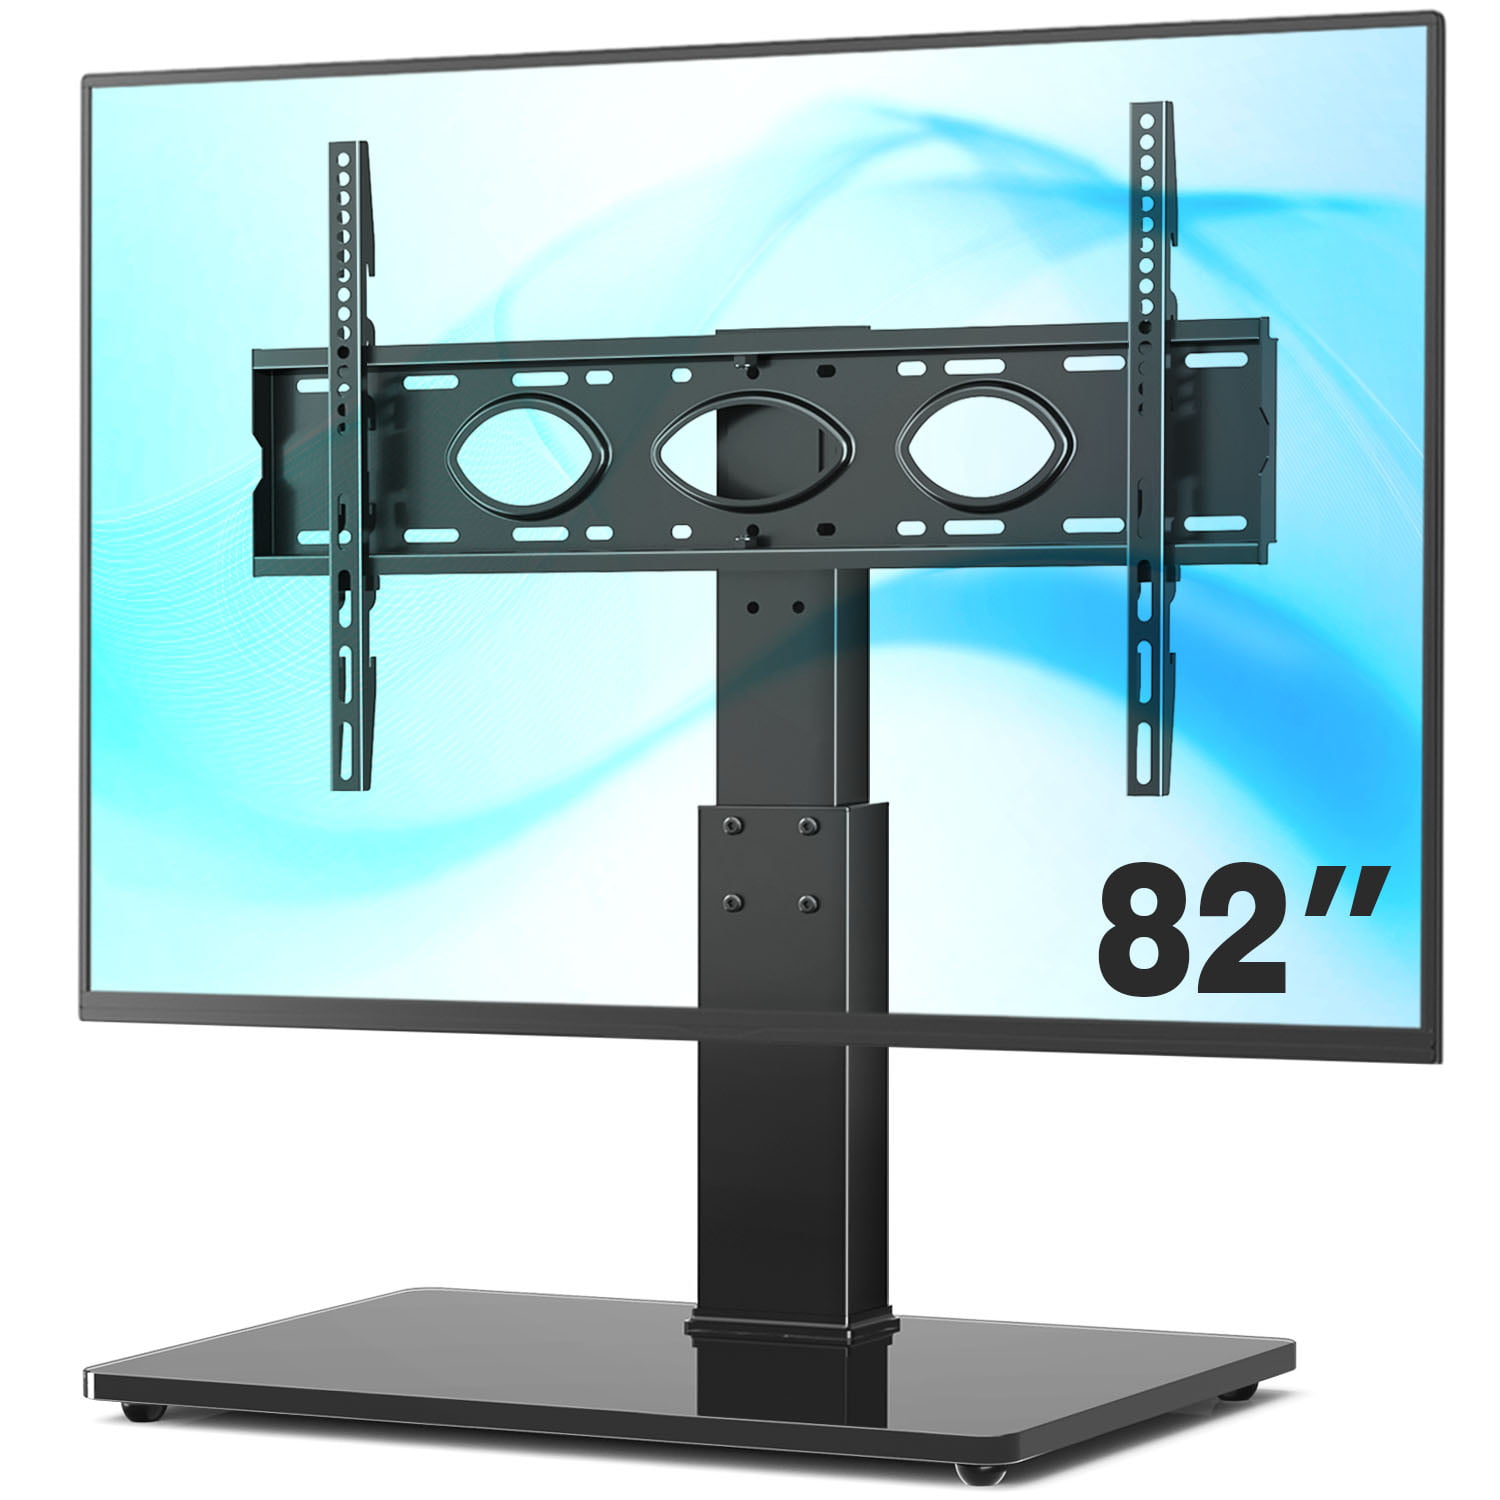 Weighing up to 88lbs VESA 400x400mm 5Rcom UT1002A Universal Tabletop TV Stand Base with Swivel Mount and Height Adjustable for 27 32 37 40 42 46 50 inch TVs